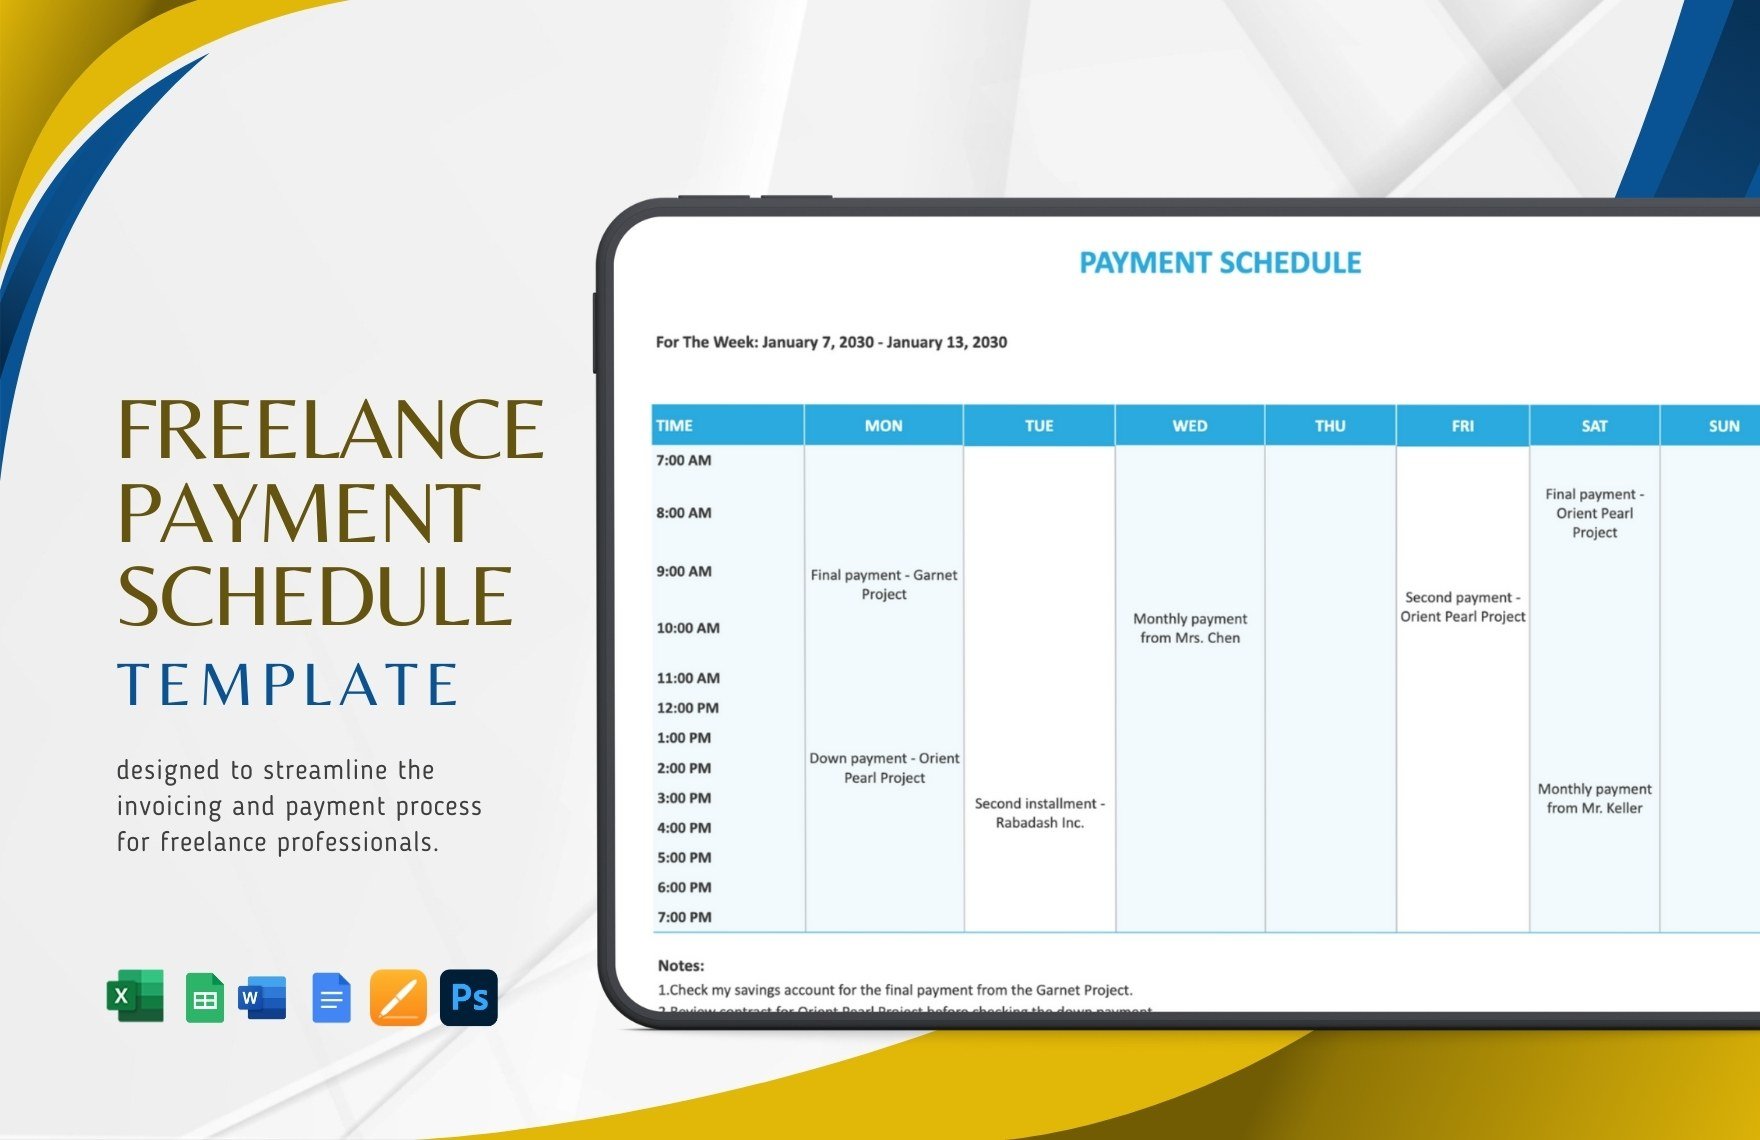 Freelance Payment Schedule Template in Word, Google Docs, Excel, Google Sheets, PSD, Apple Pages